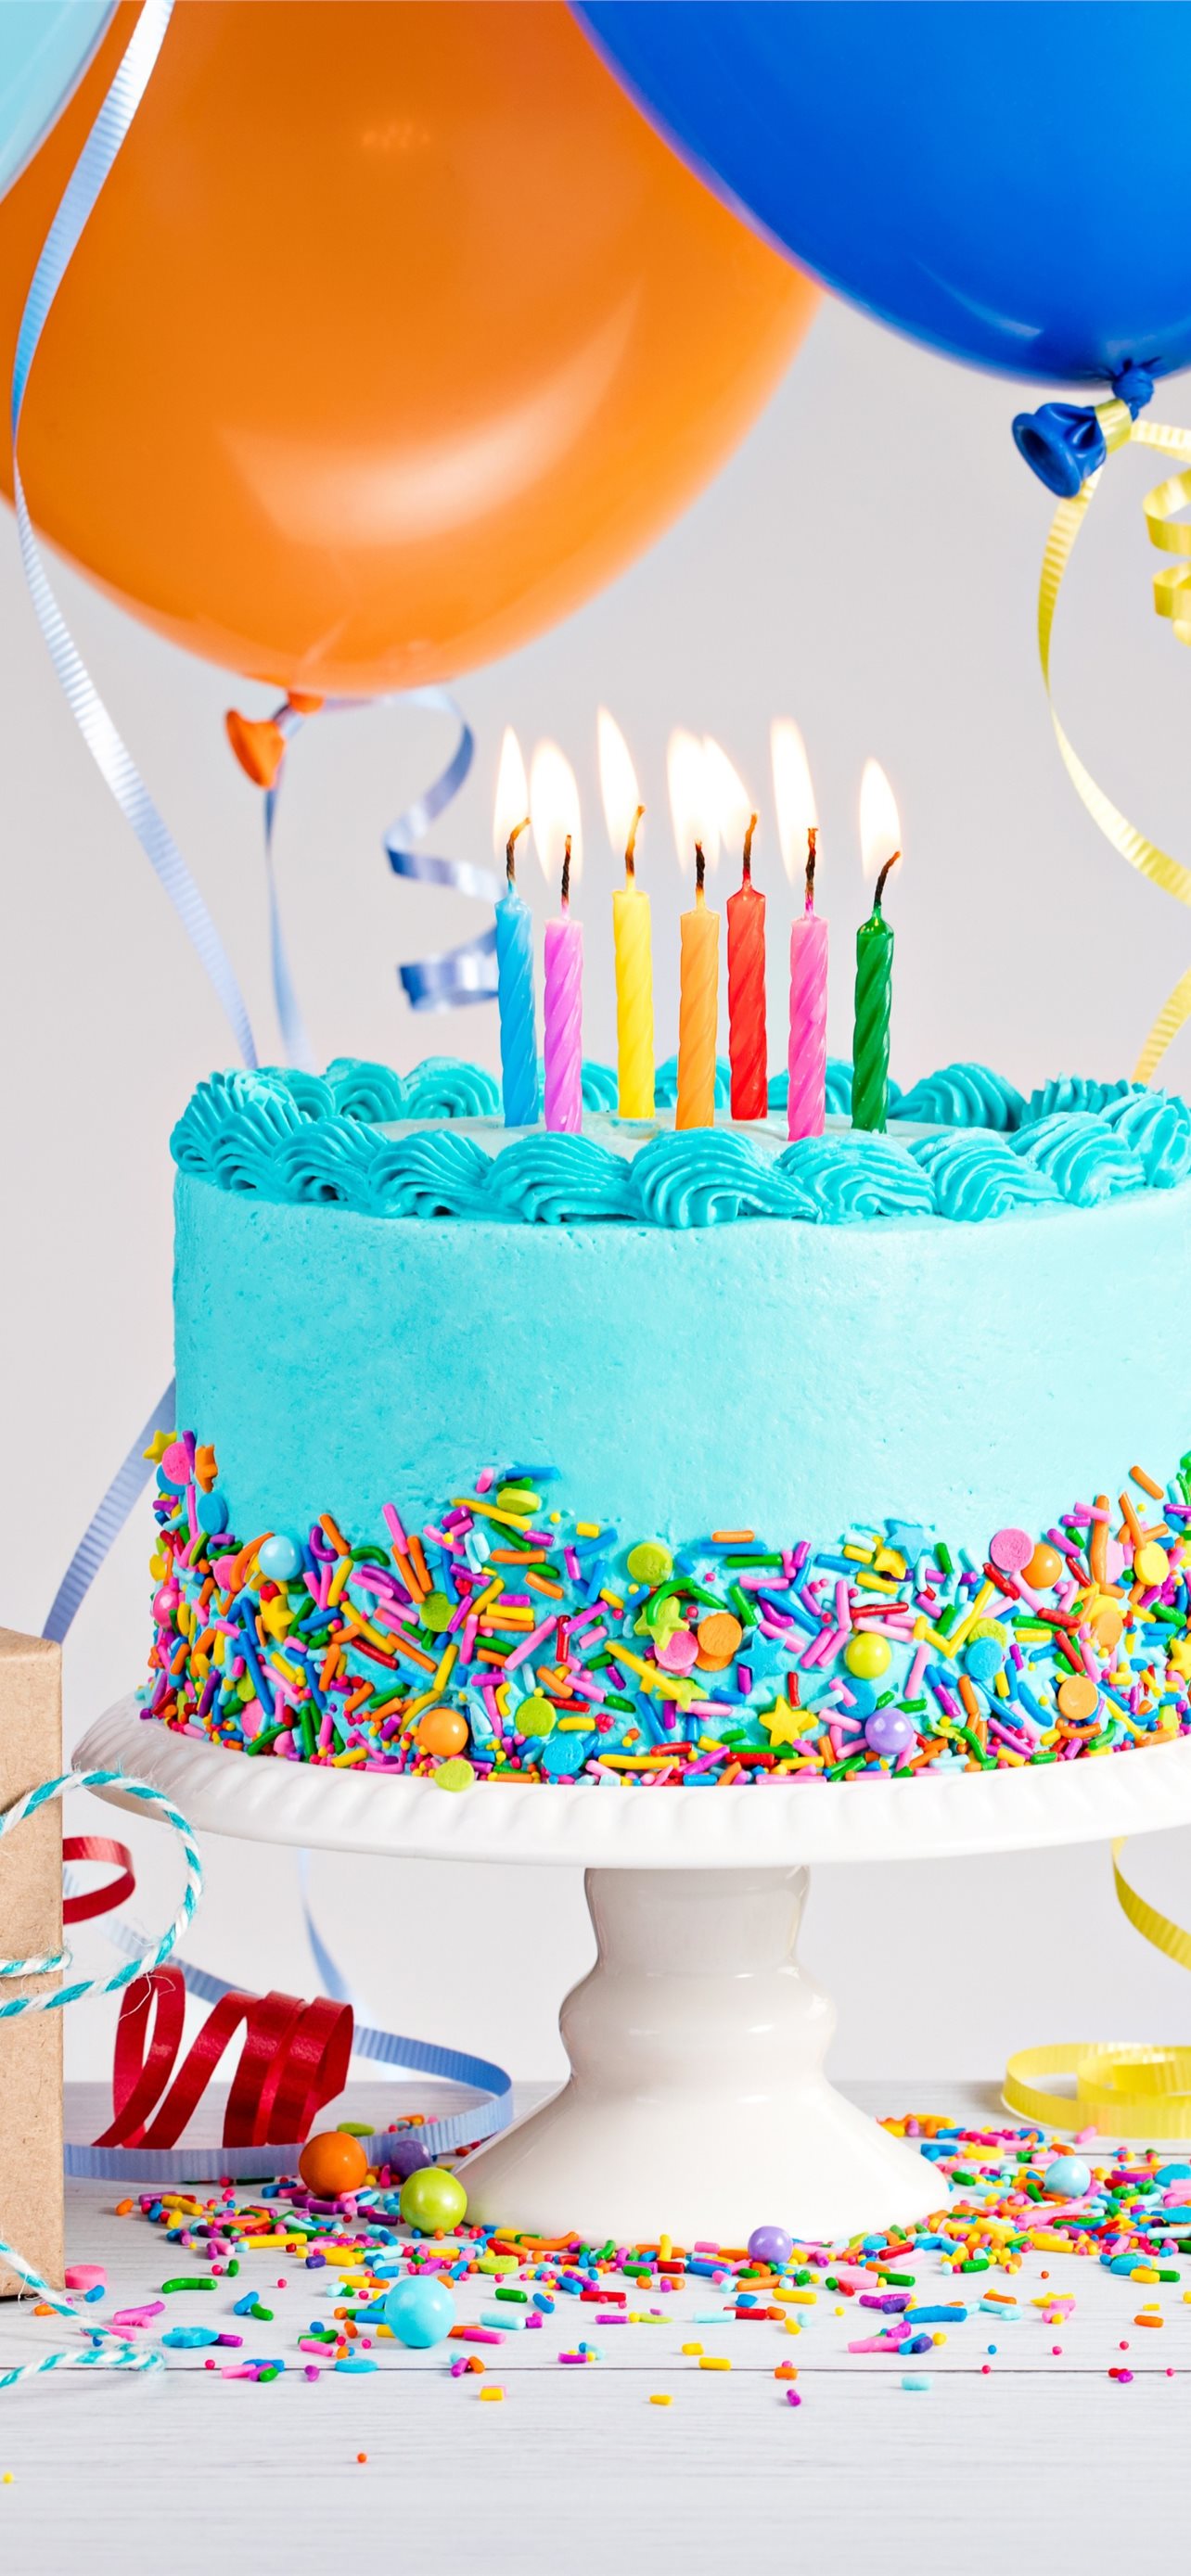 birthday cake receipt 8k Food iPhone Wallpapers Free Download